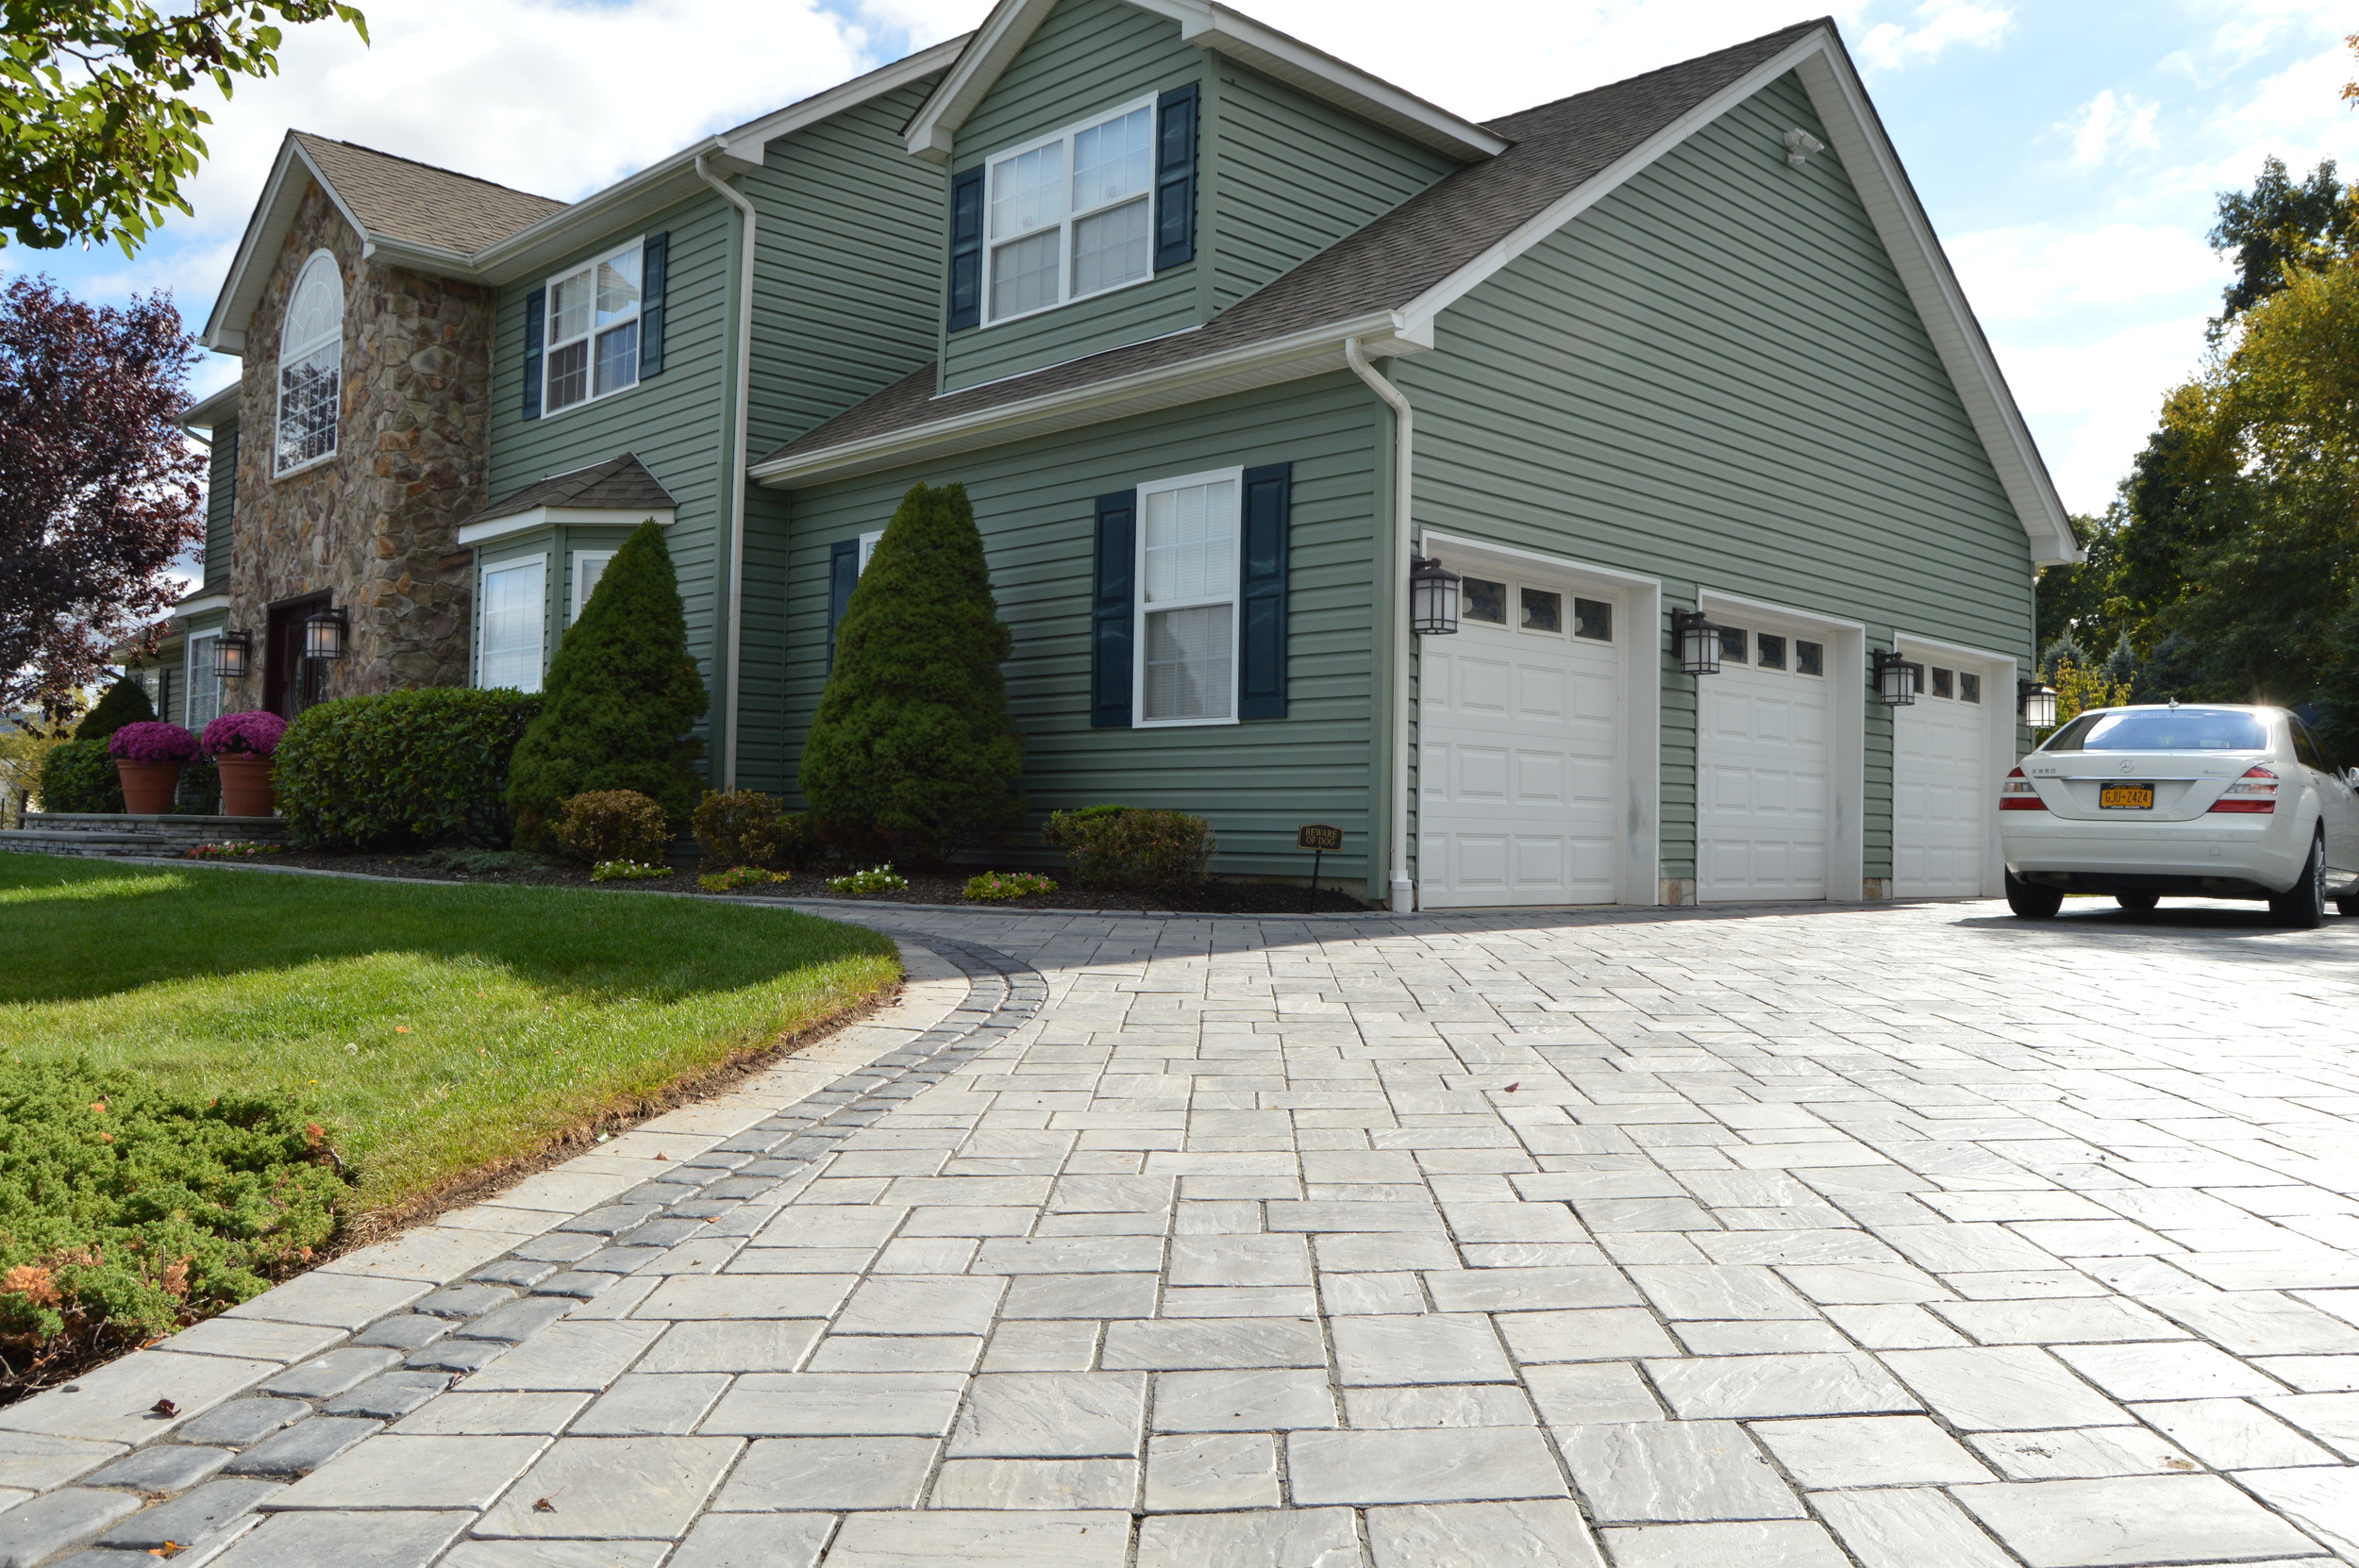 Here’s How You Can Make Your Driveways Look Classy